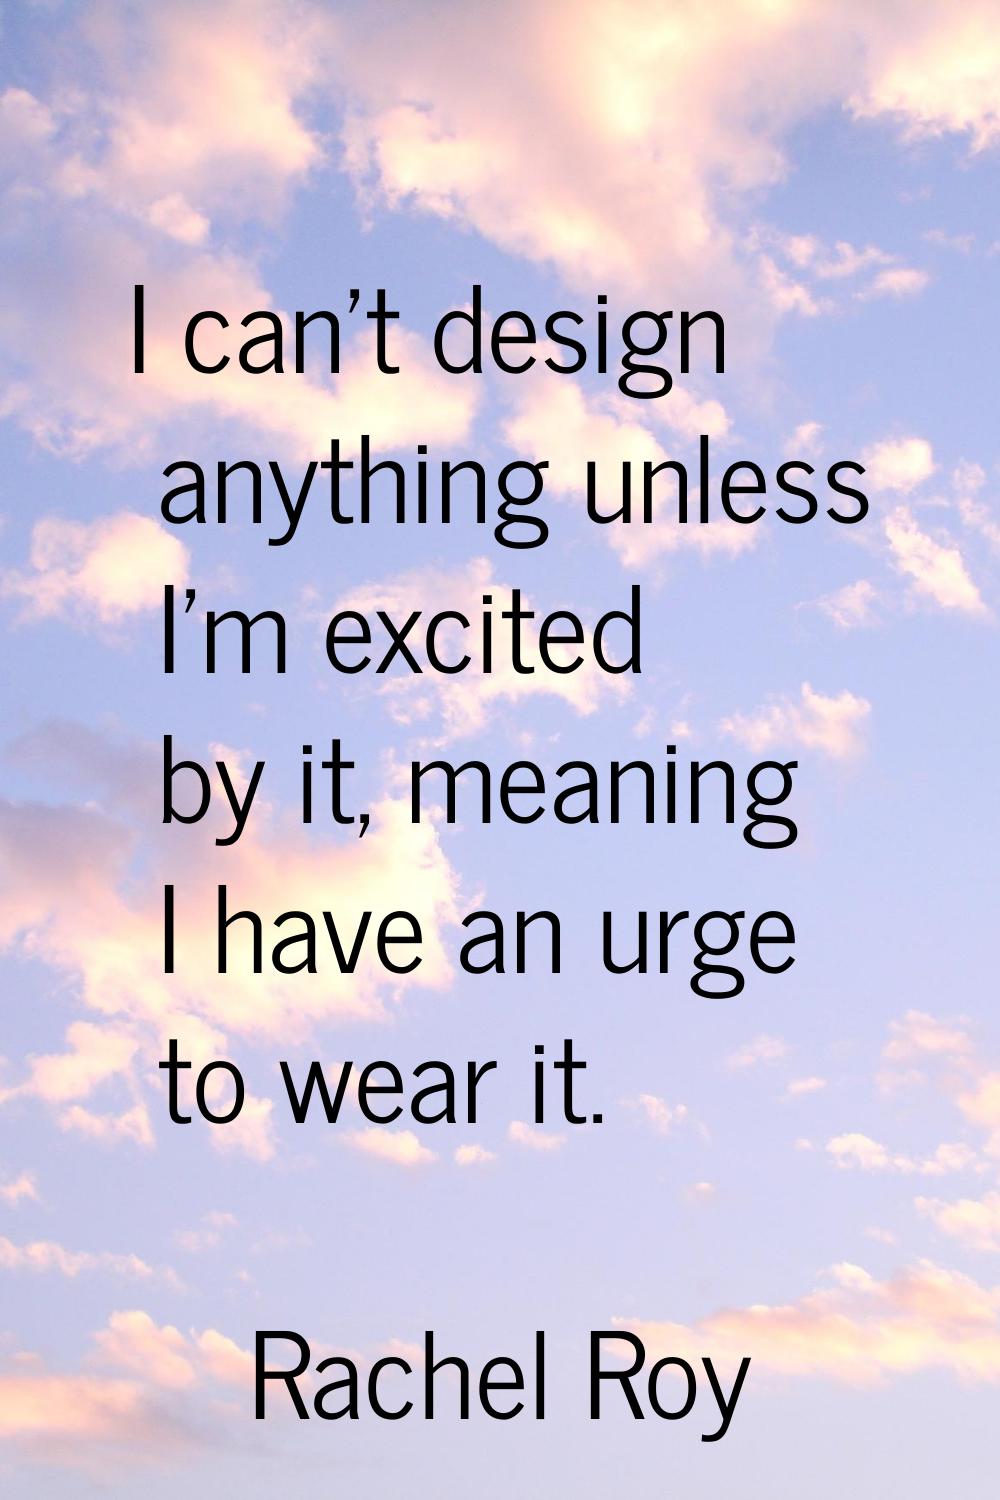 I can't design anything unless I'm excited by it, meaning I have an urge to wear it.